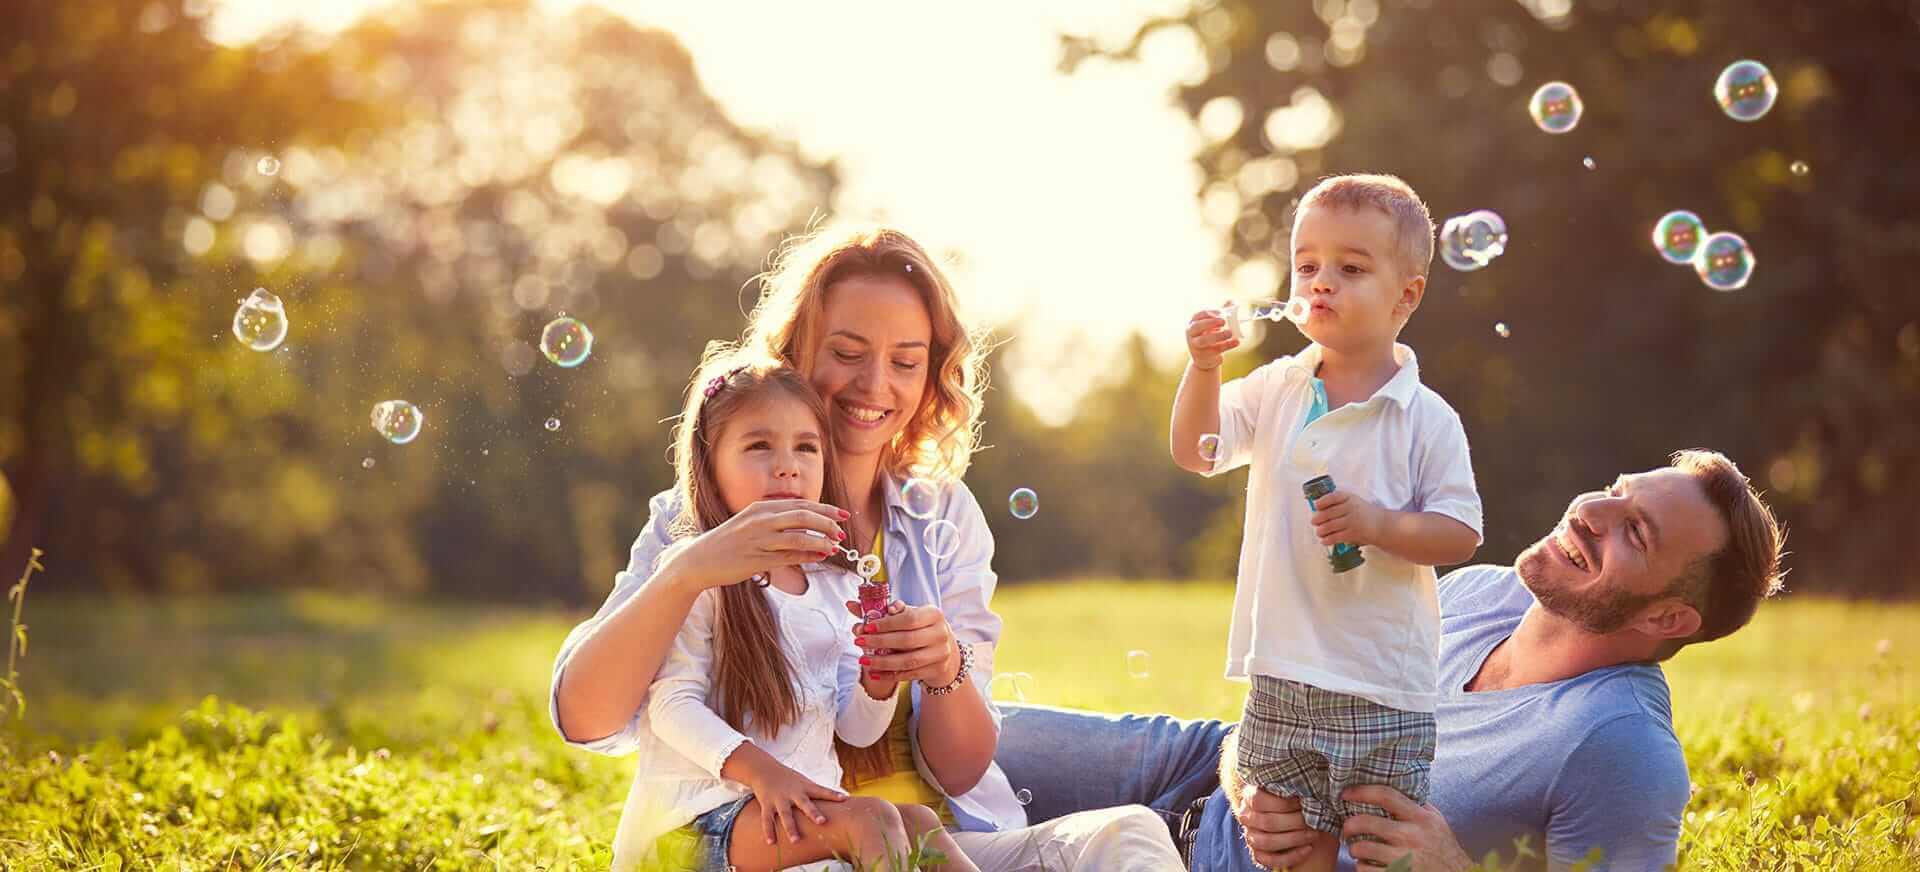 Family outside blowing bubbles